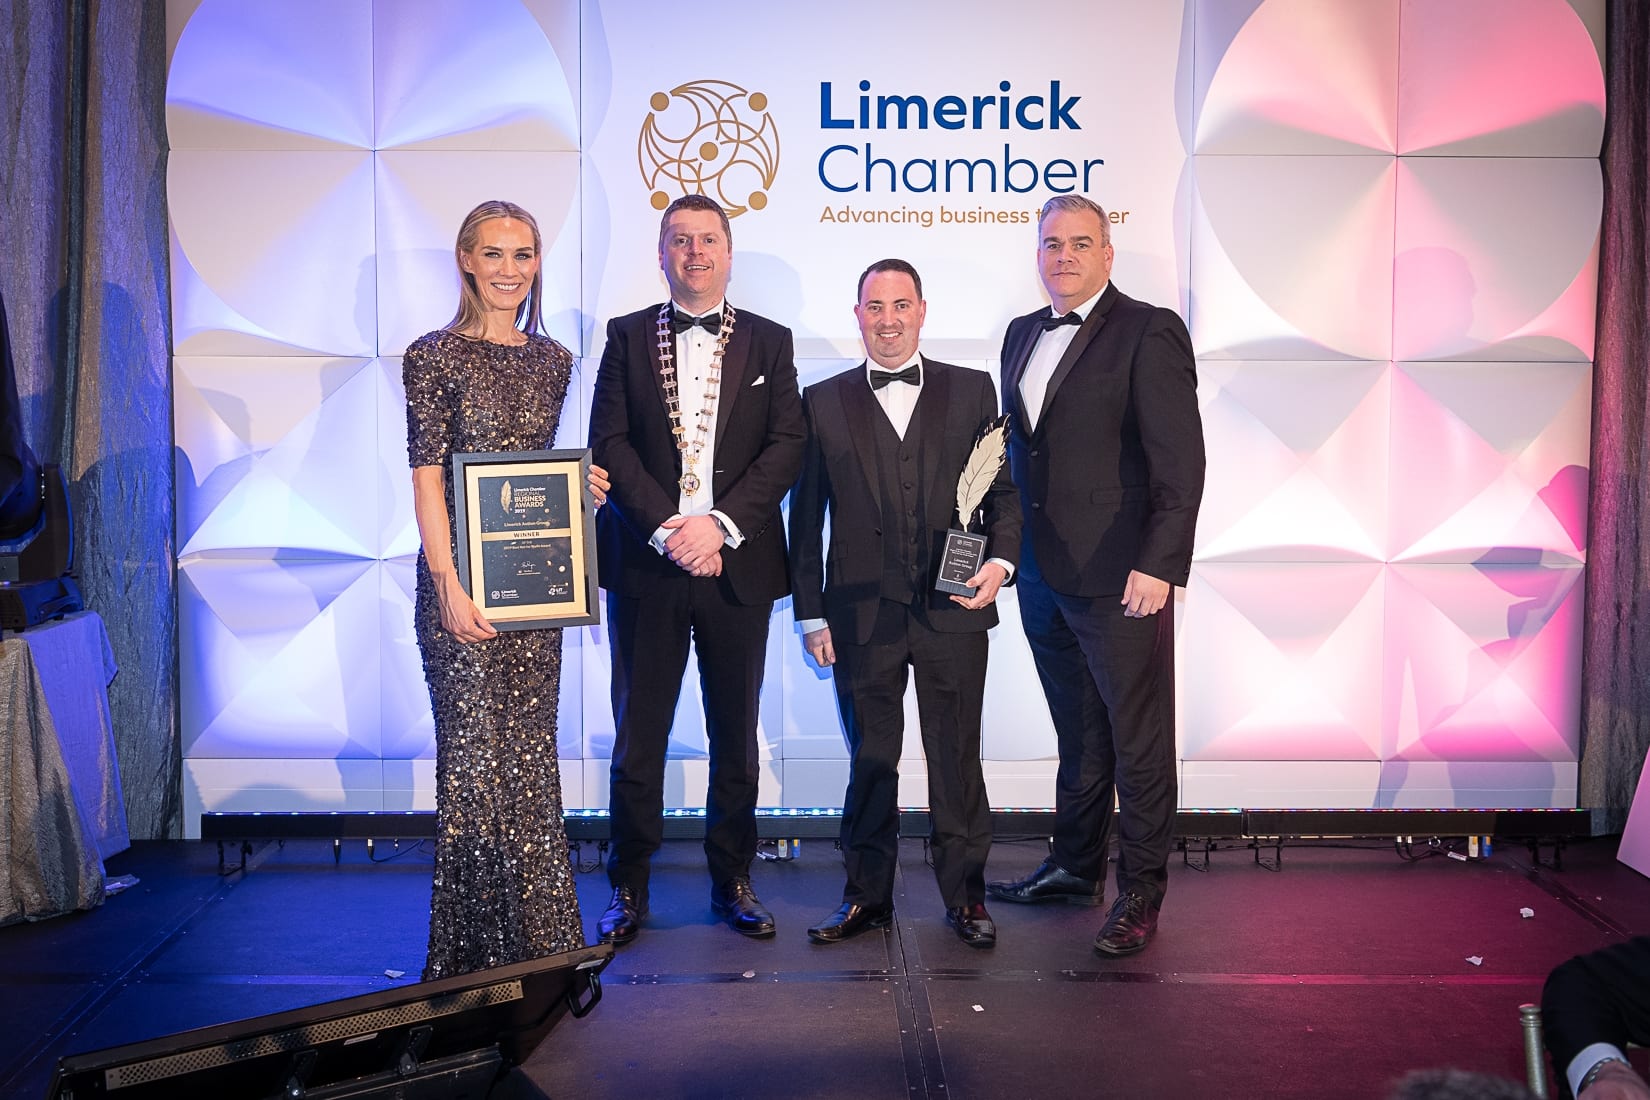 No repro fee-Limerick Chamber President’s Dinner
and Limerick Chamber Regional Business Awards 2019 which was held in the Strand Hotel on Friday 15th November /Best Not for Profit/  - From Left to Right: Dee Ryan - CEO Limerick Chamber, Eoin Ryan - President Limerick Chamber, Keith Enright - Limerick Autism Group, Noel Gavin - Northern Trust / Sponsor. 
Photo credit Shauna Kennedy